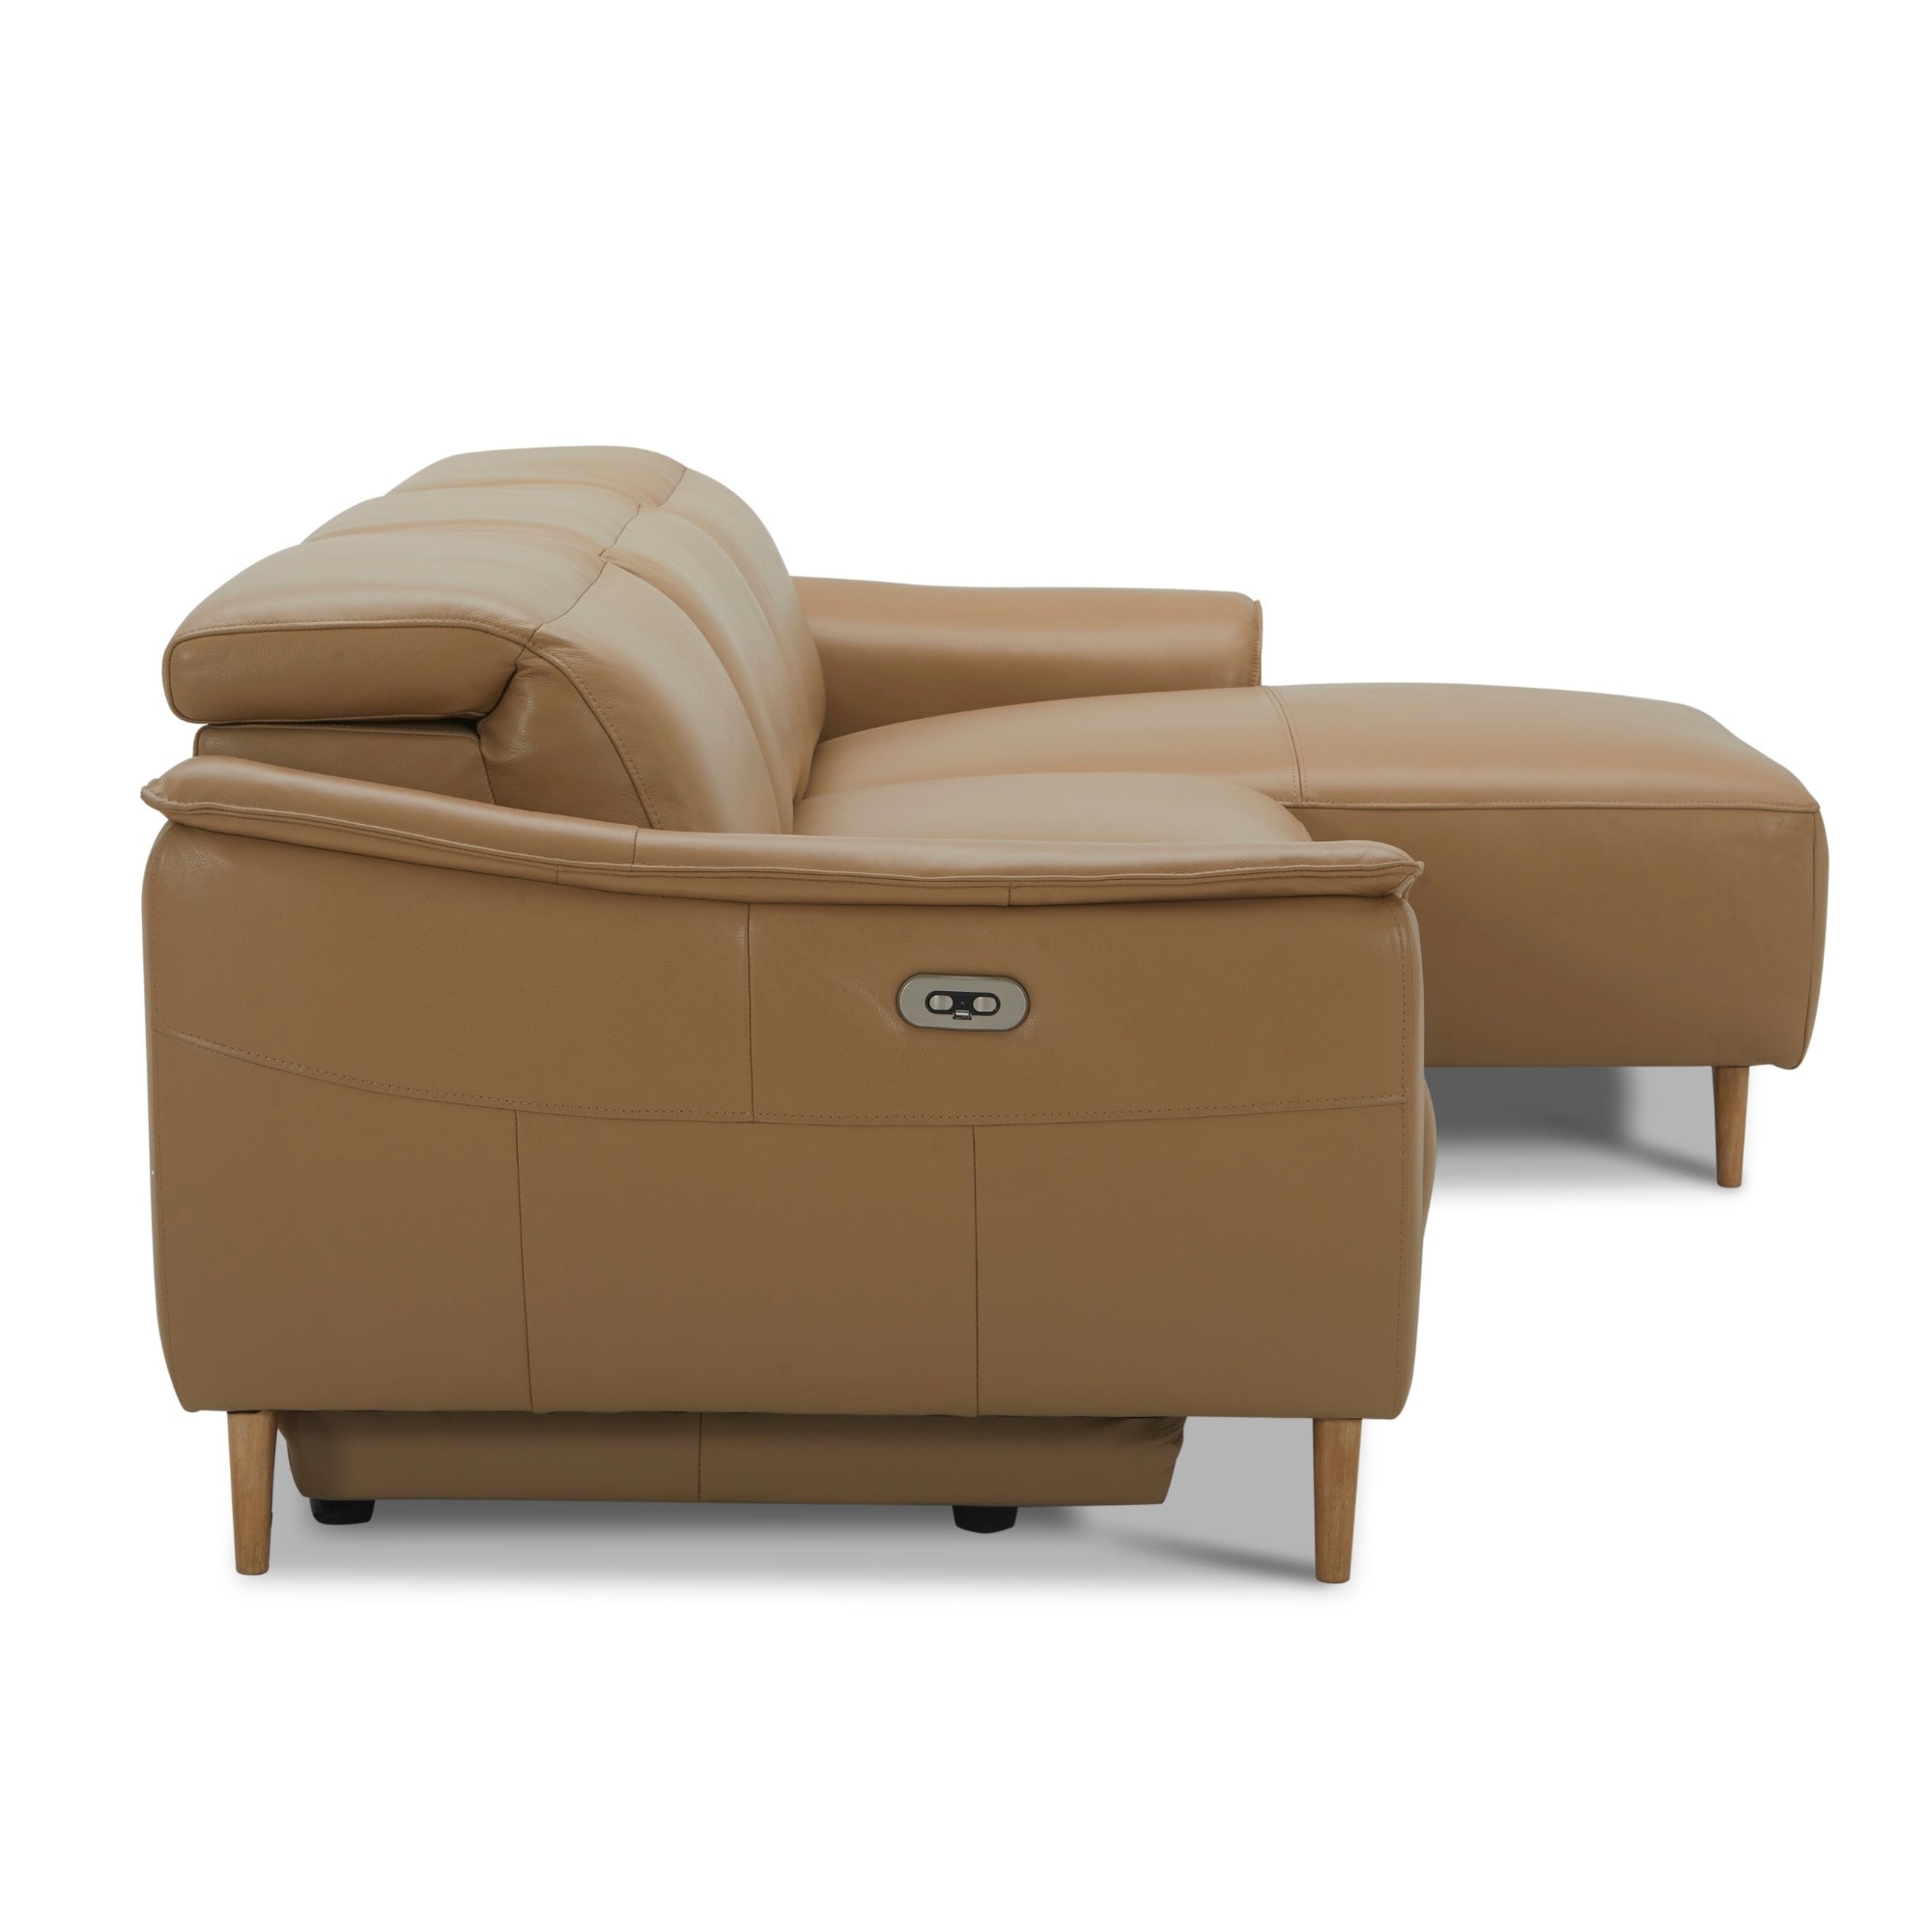 2 Seater Leather Recliner Sofa with Chaise, USB Port